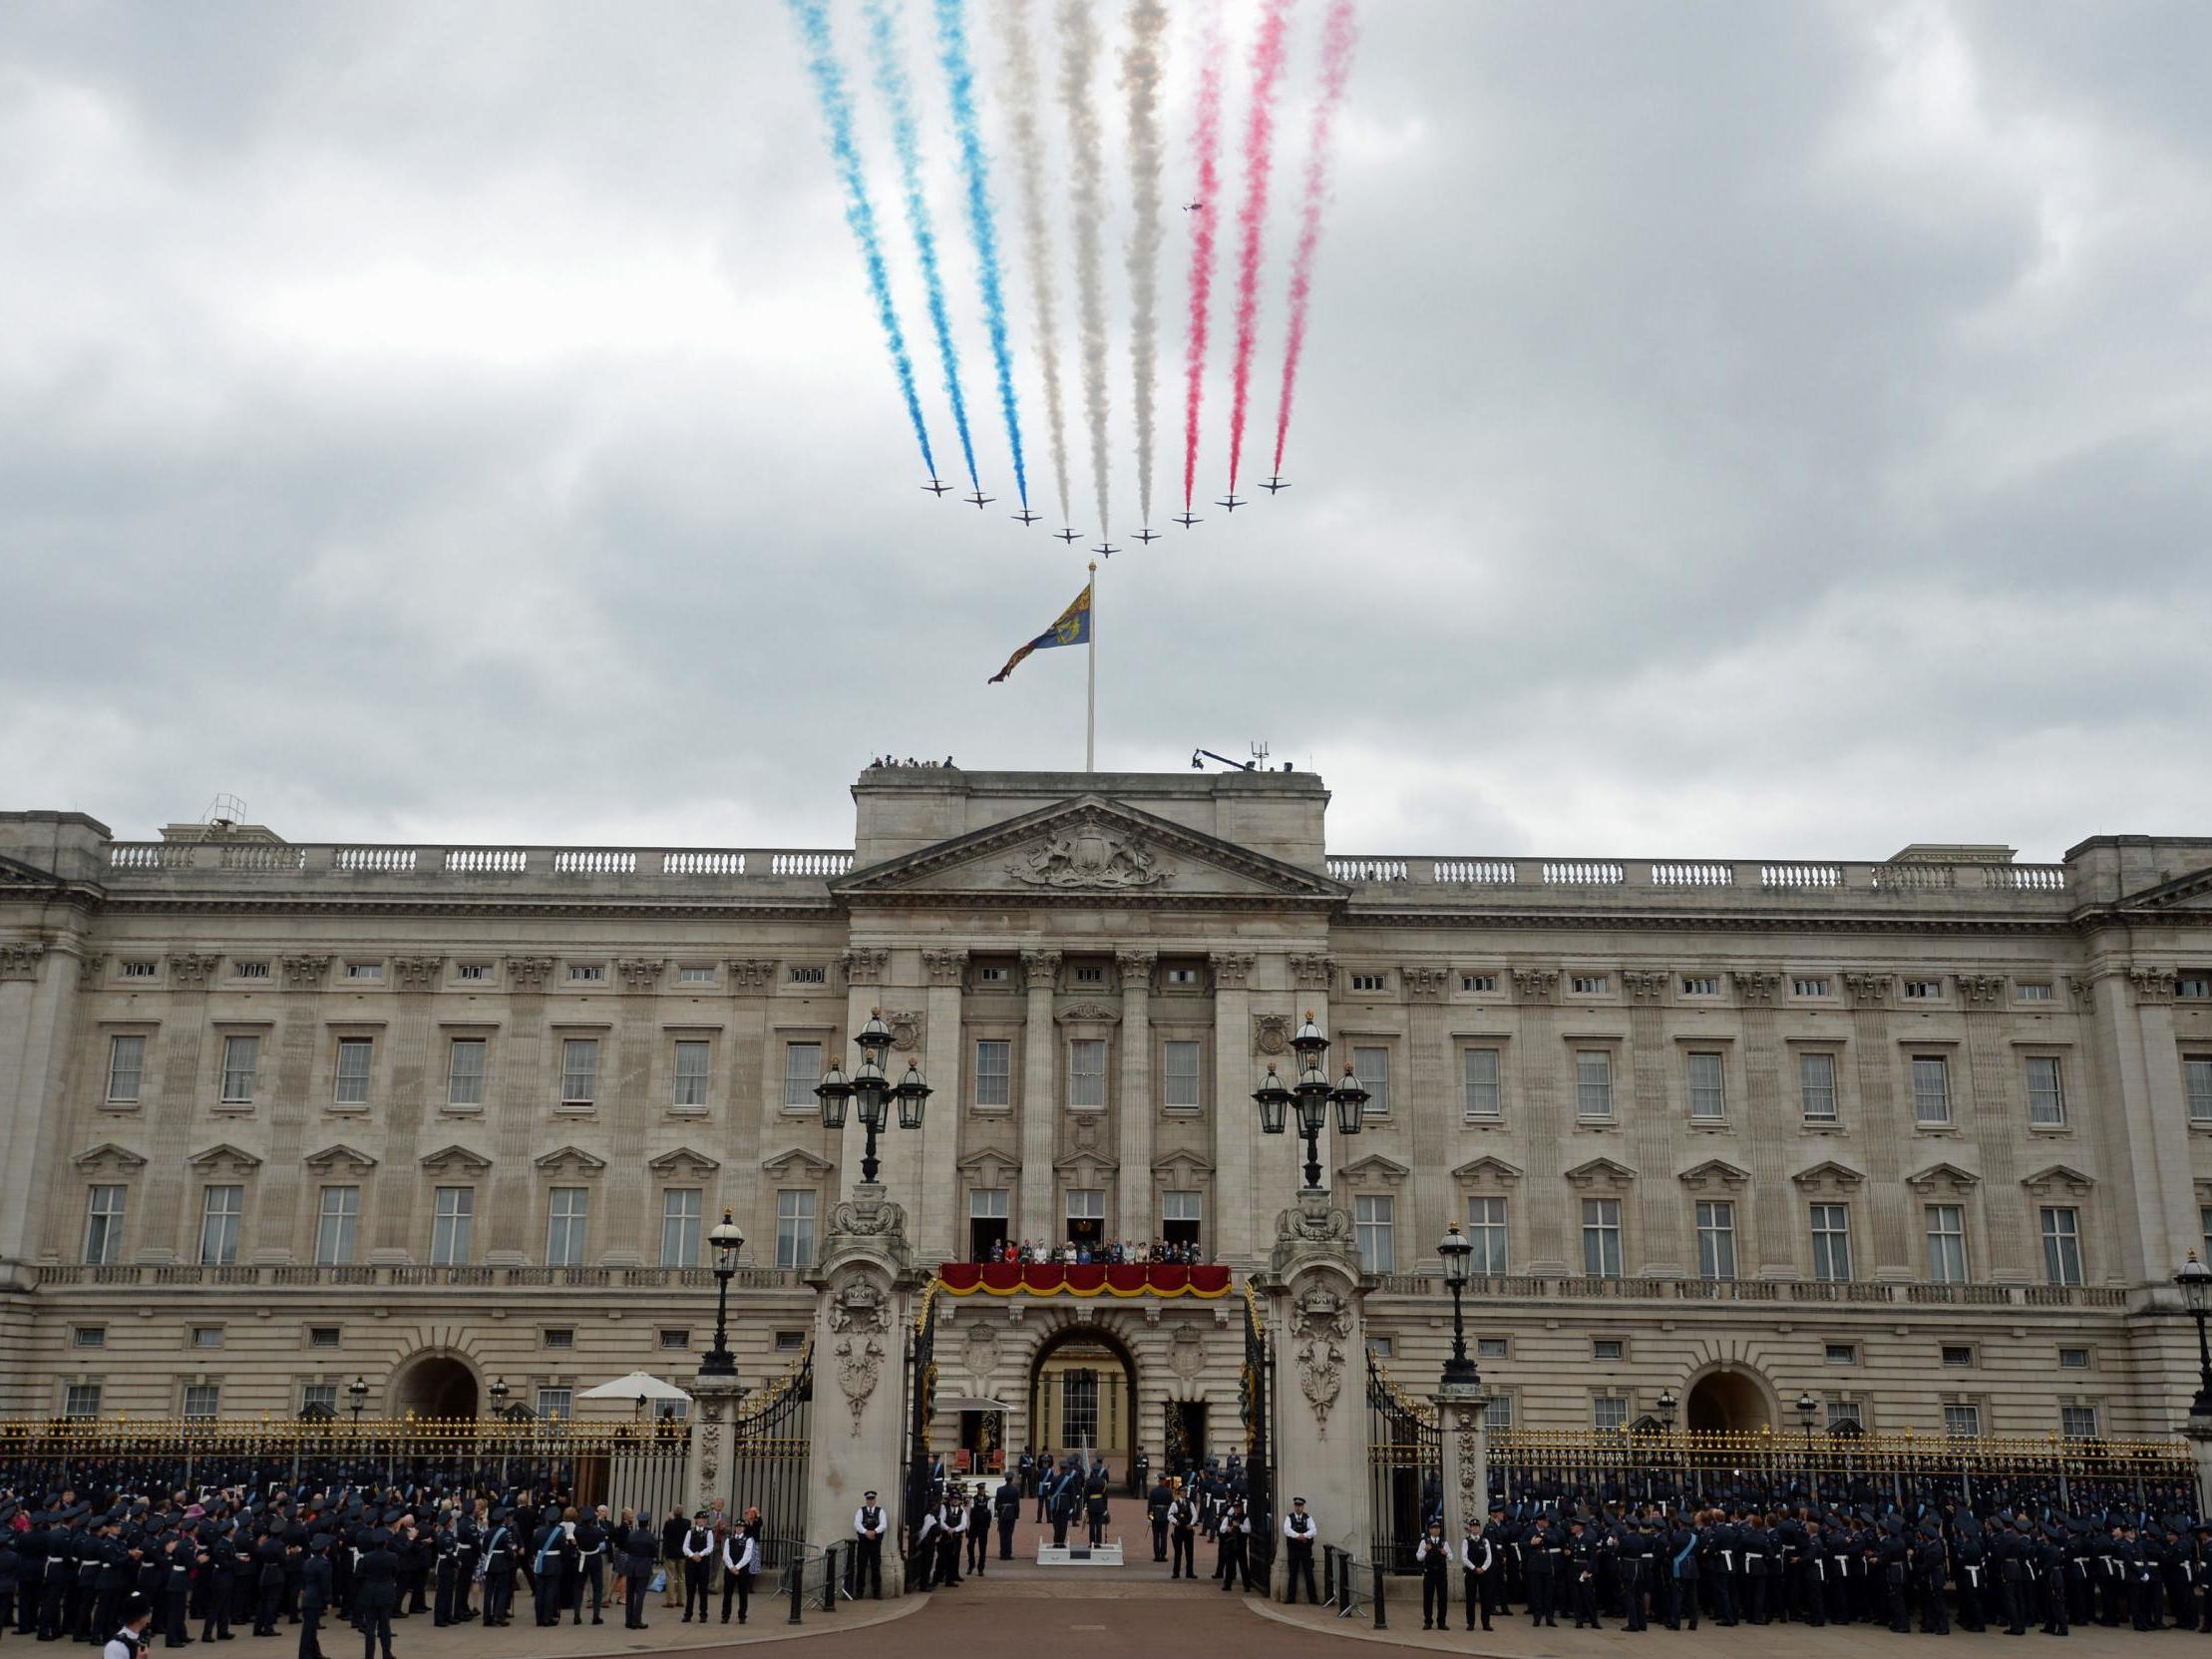 RAF aircraft fly in formation over Buckingham Palace in London to mark the centenary of the Royal Air Force